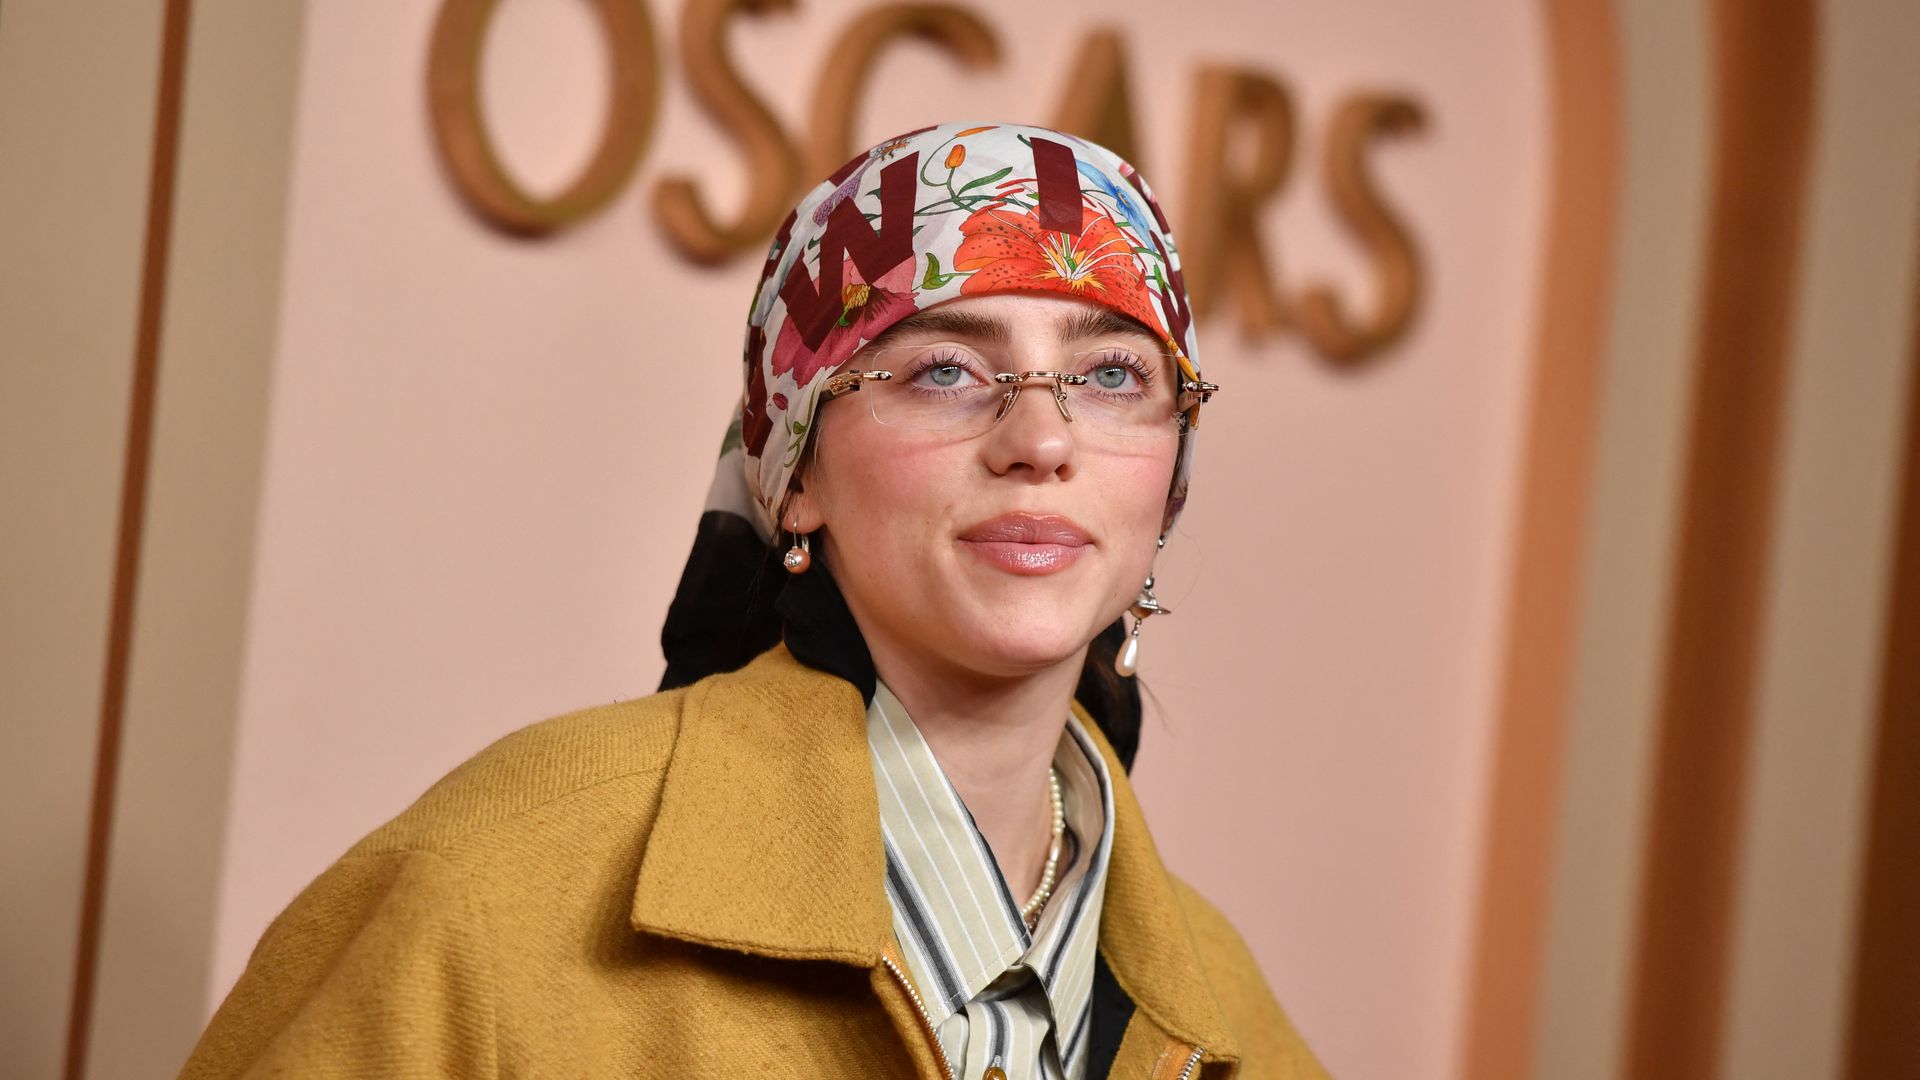 Billie Eilish shares glimpse into special Oscars after-party moment